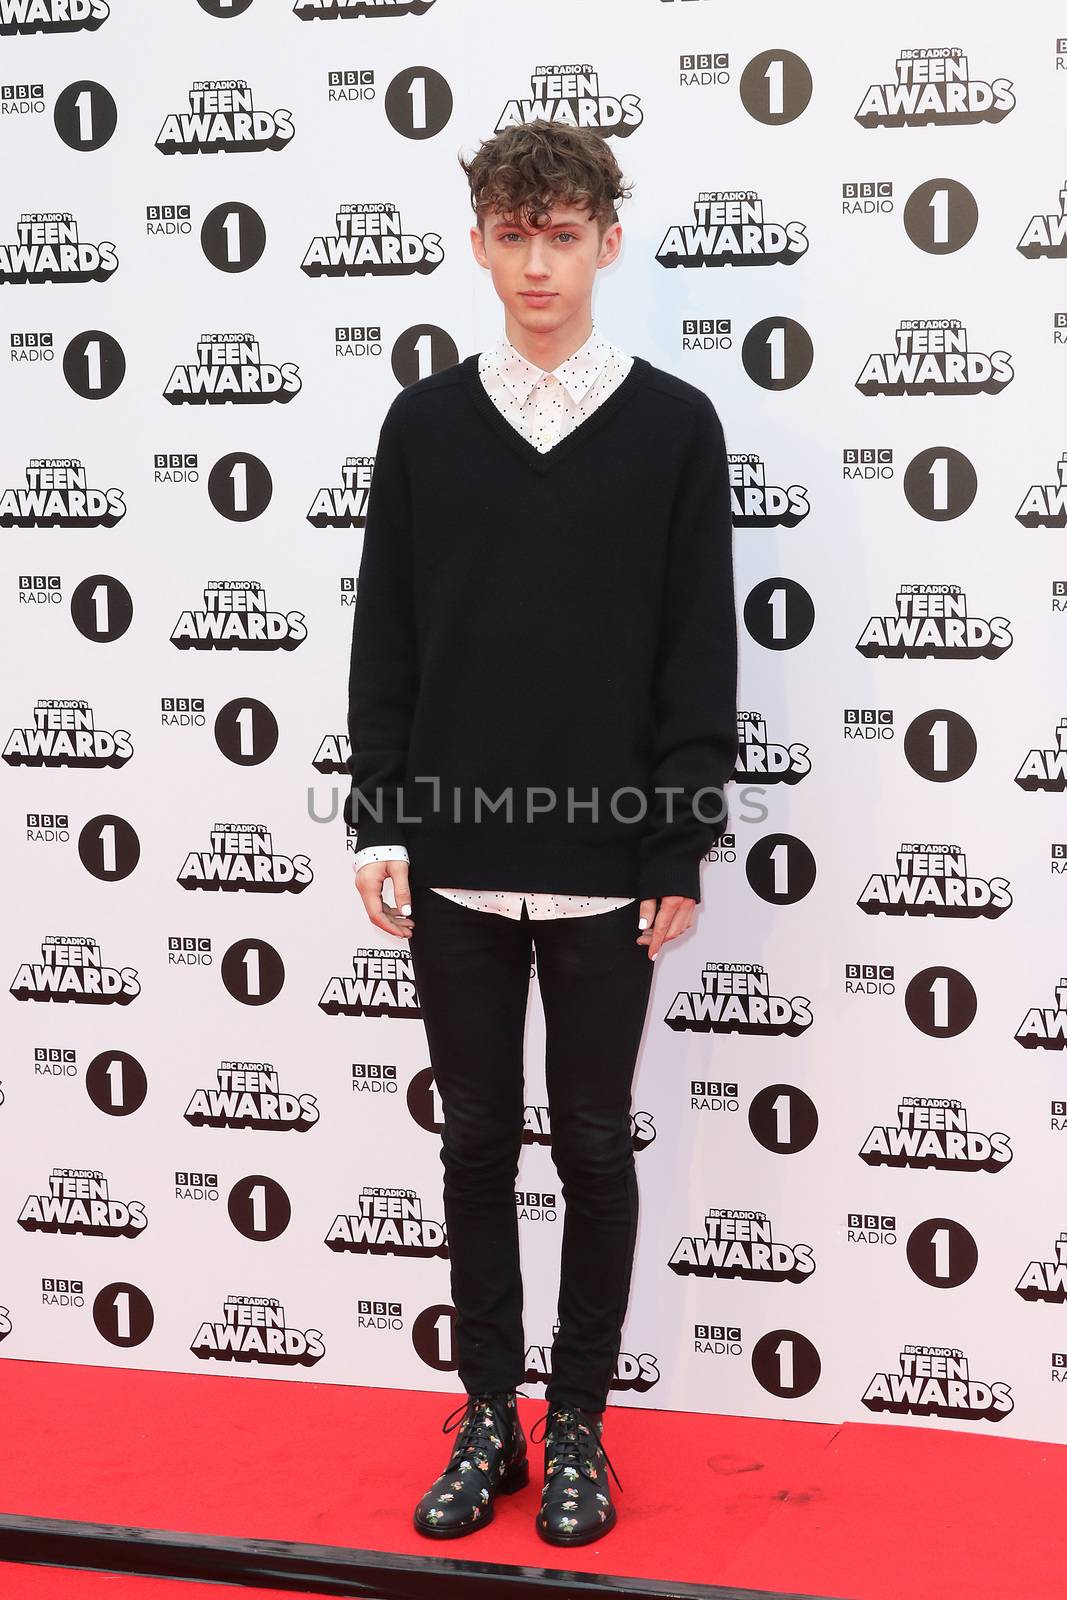 UNITED KINGDOM, London: Troye Sivan attends BBC Radio 1's Teen Awards at Wembley Arena in London on November 8, 2015. 